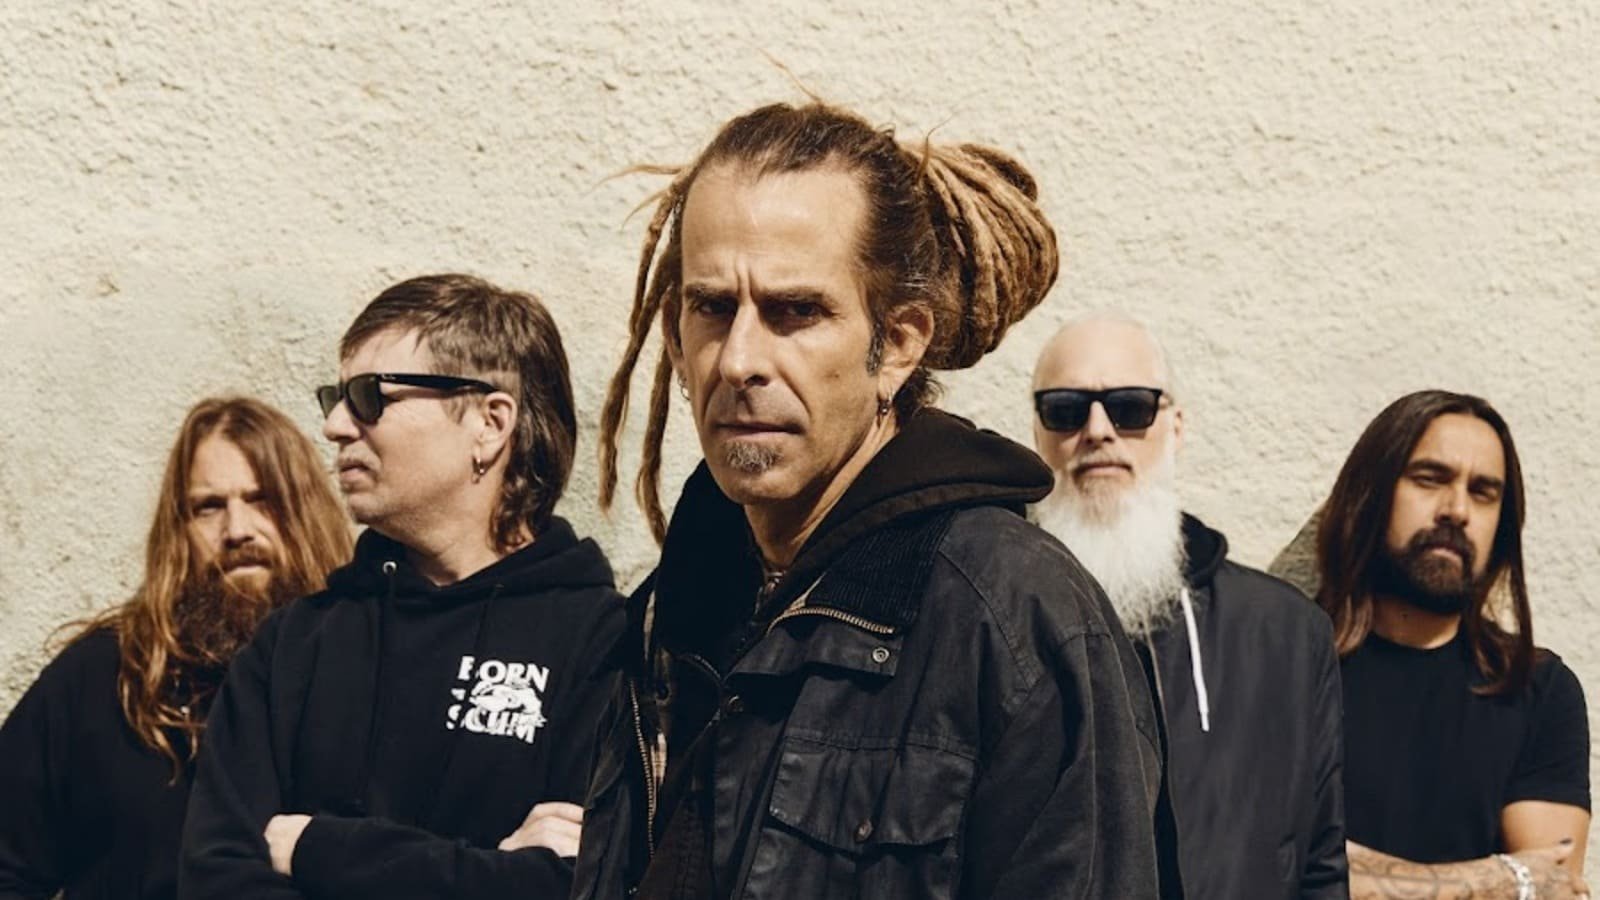 Lamb of God Shares 2023 Tour Dates - Lamb of God Concert and Festival Schedules